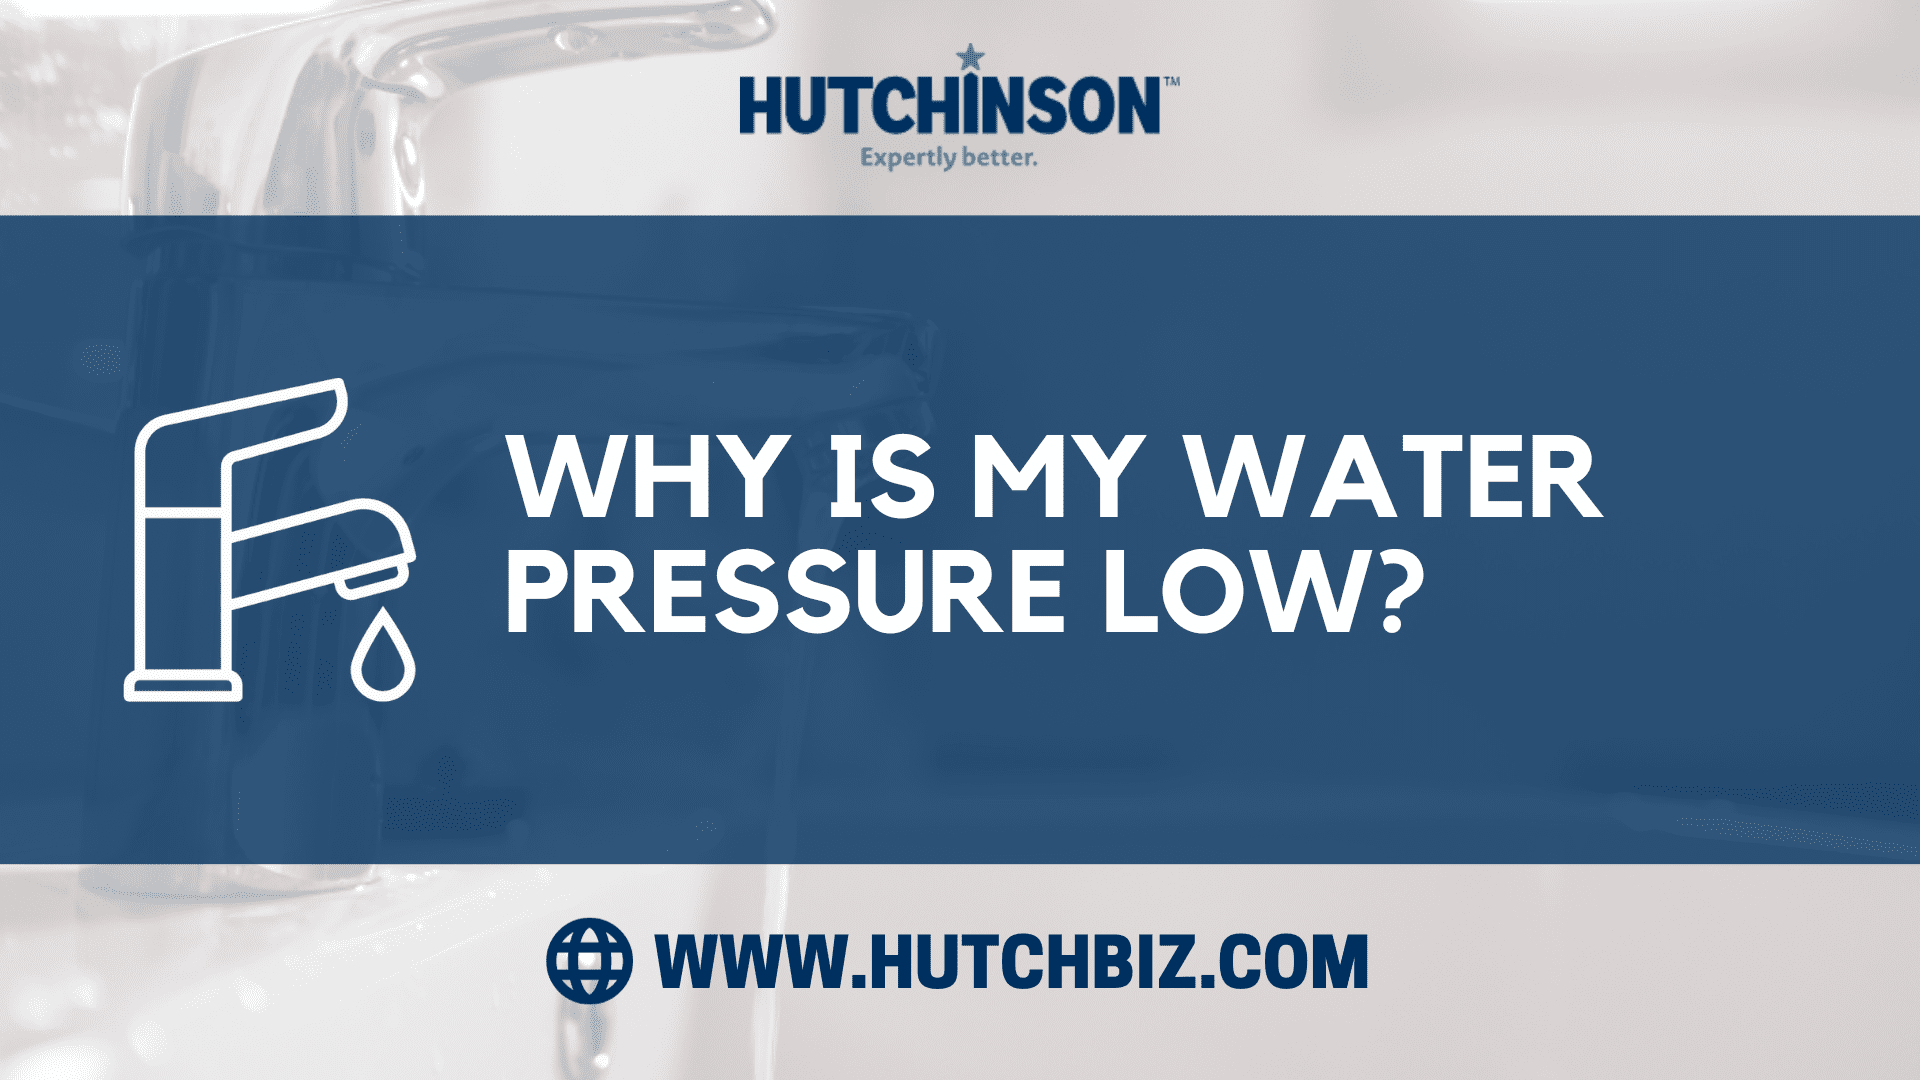 Why Is My Water Pressure Low?